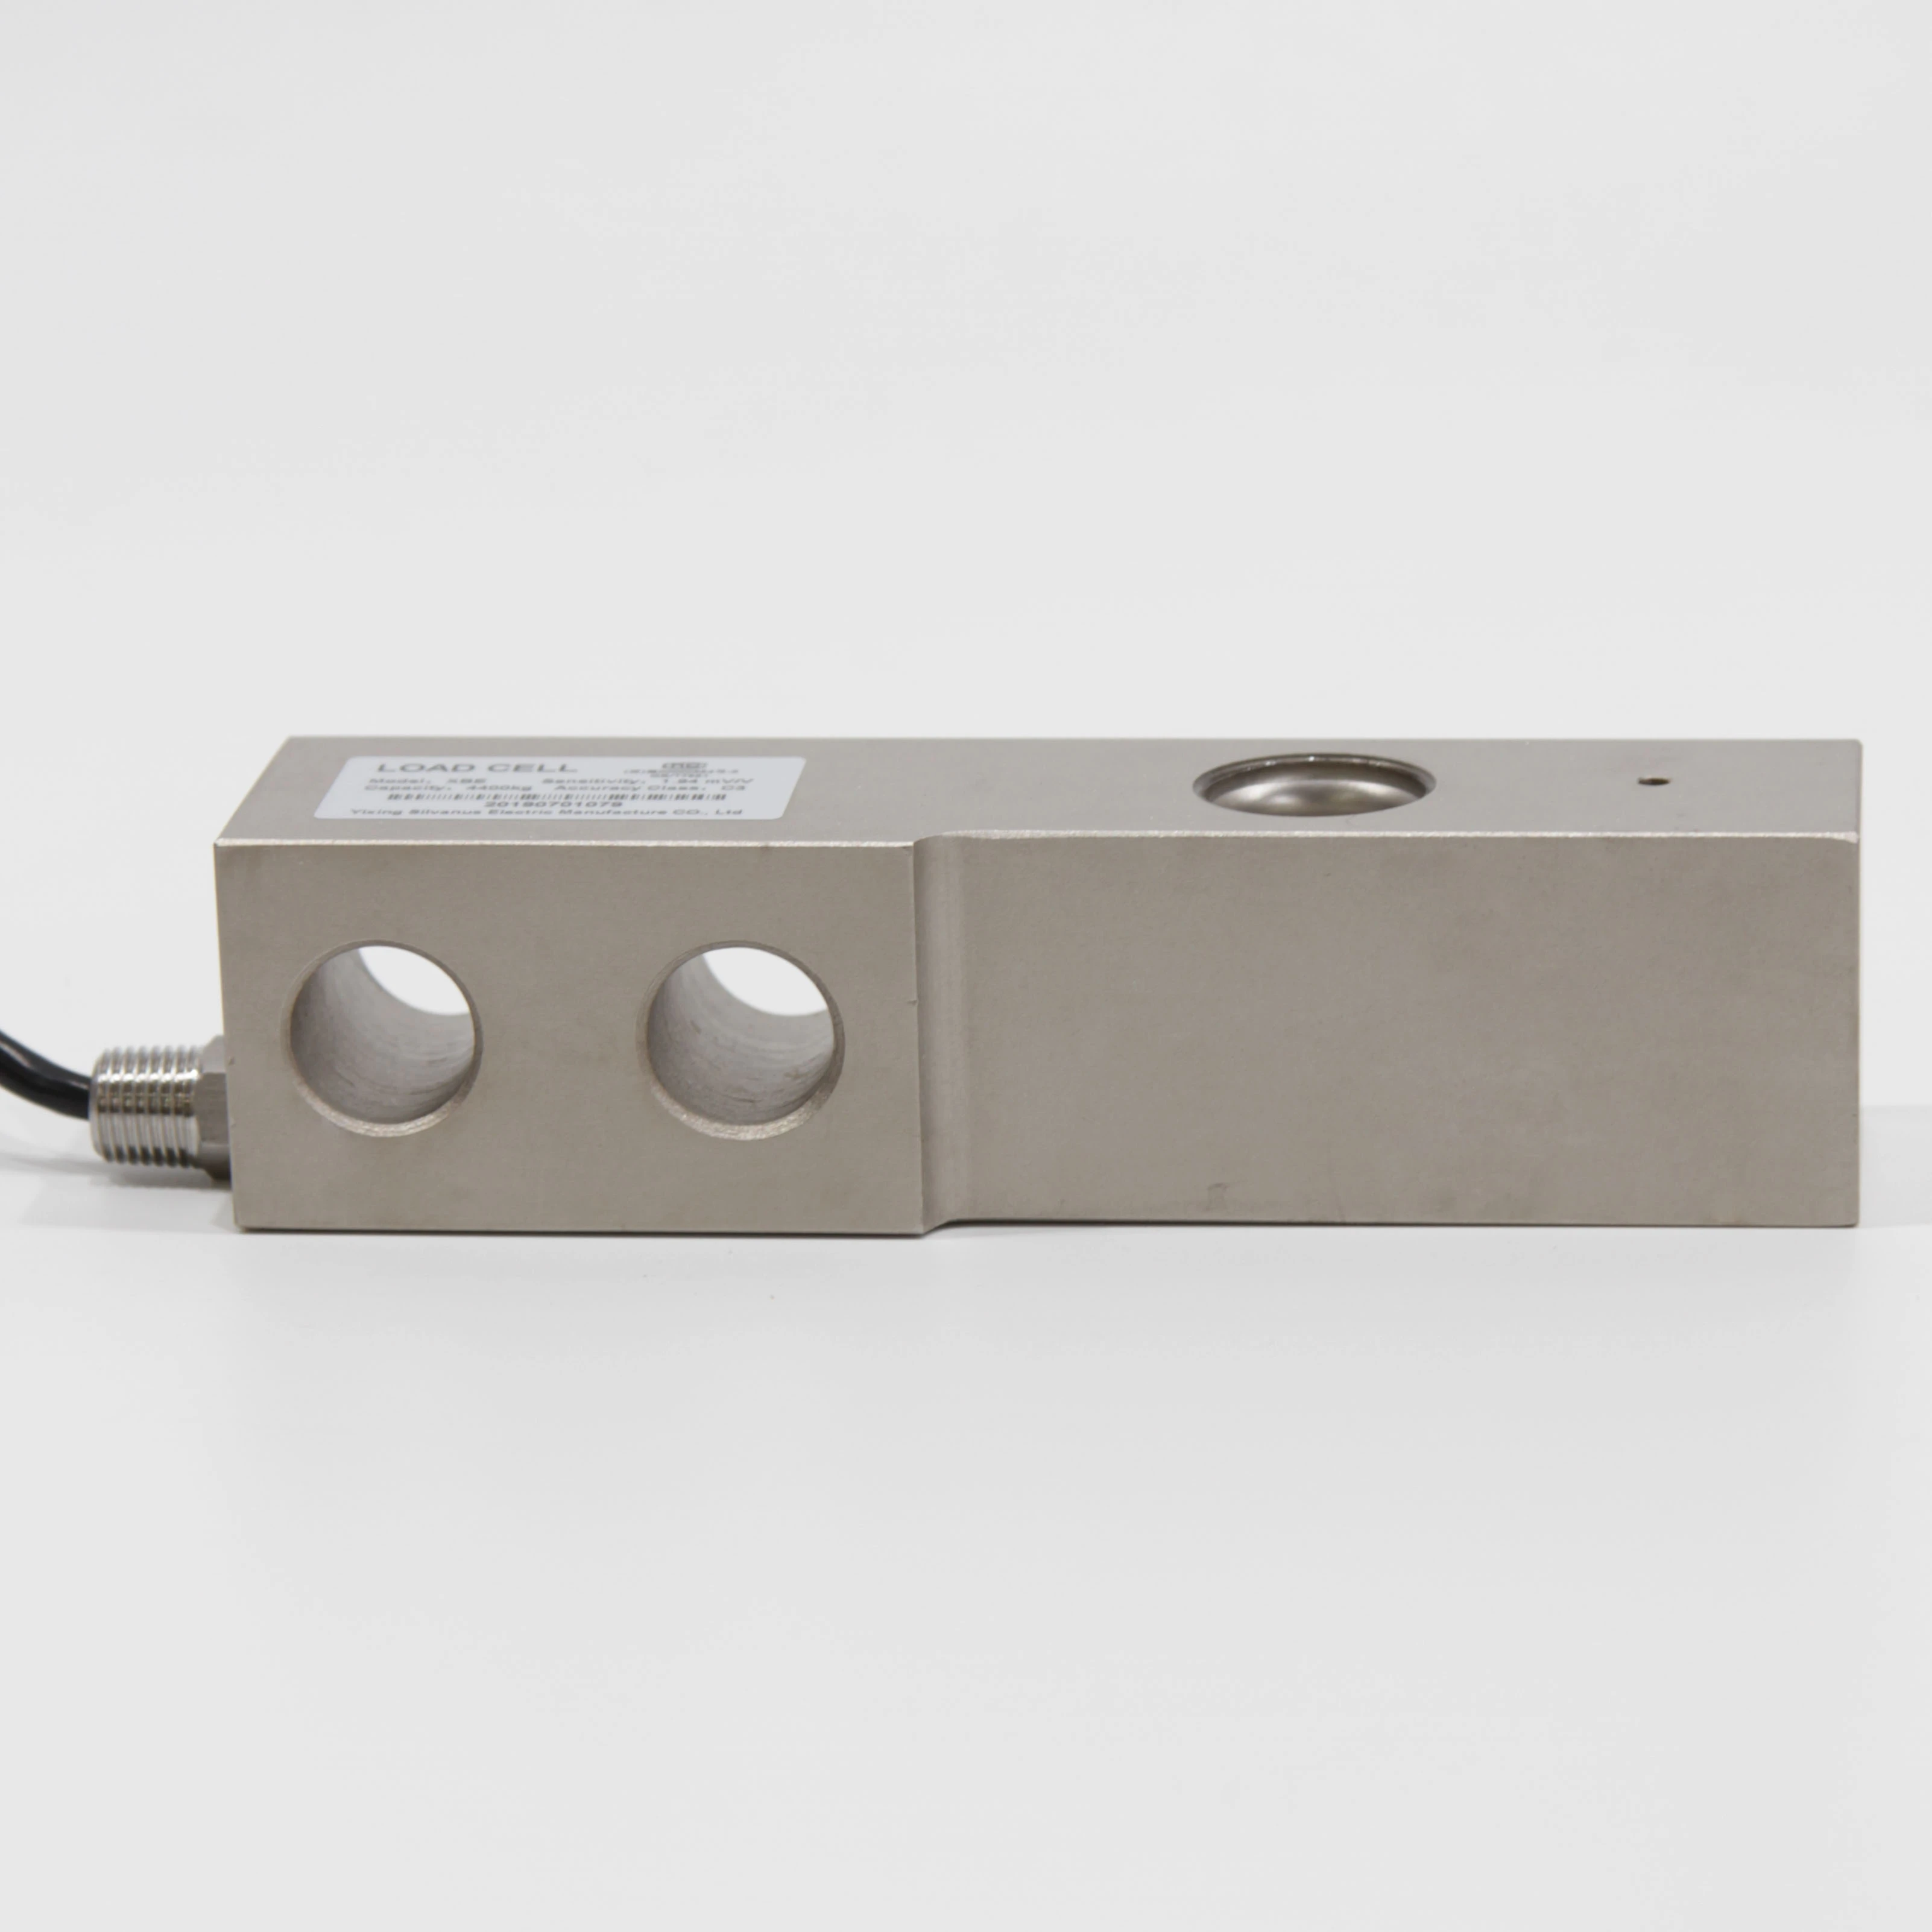 4.4T High accuracy scale weight sensor alloy steel resistance strain gauge scale load cell